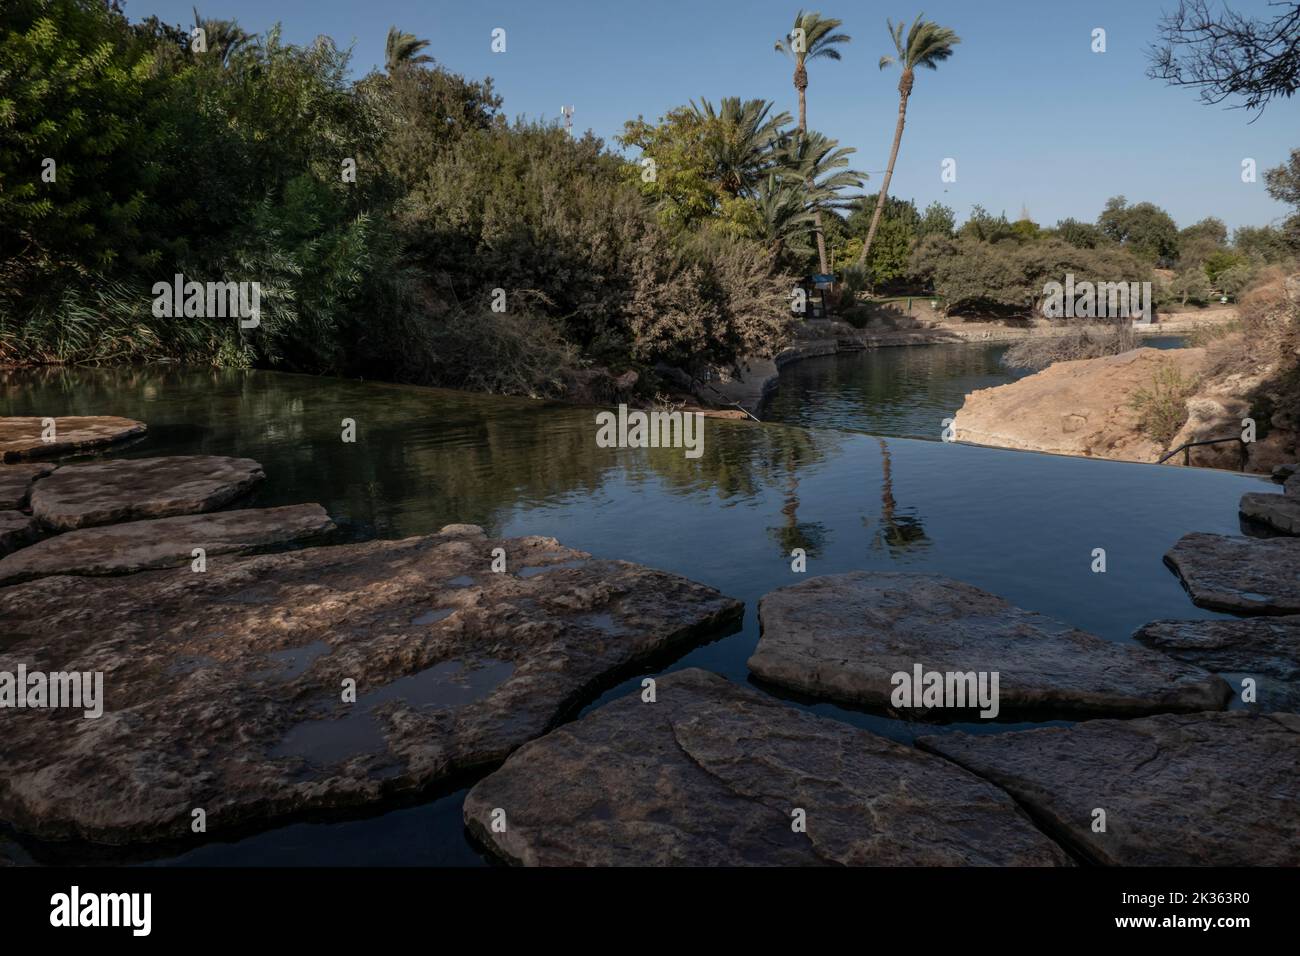 View of a natural spring water pool of Amal stream which crosses Gan HaShlosha National Park also known by its Arabic name Sakhne in Israel Stock Photo